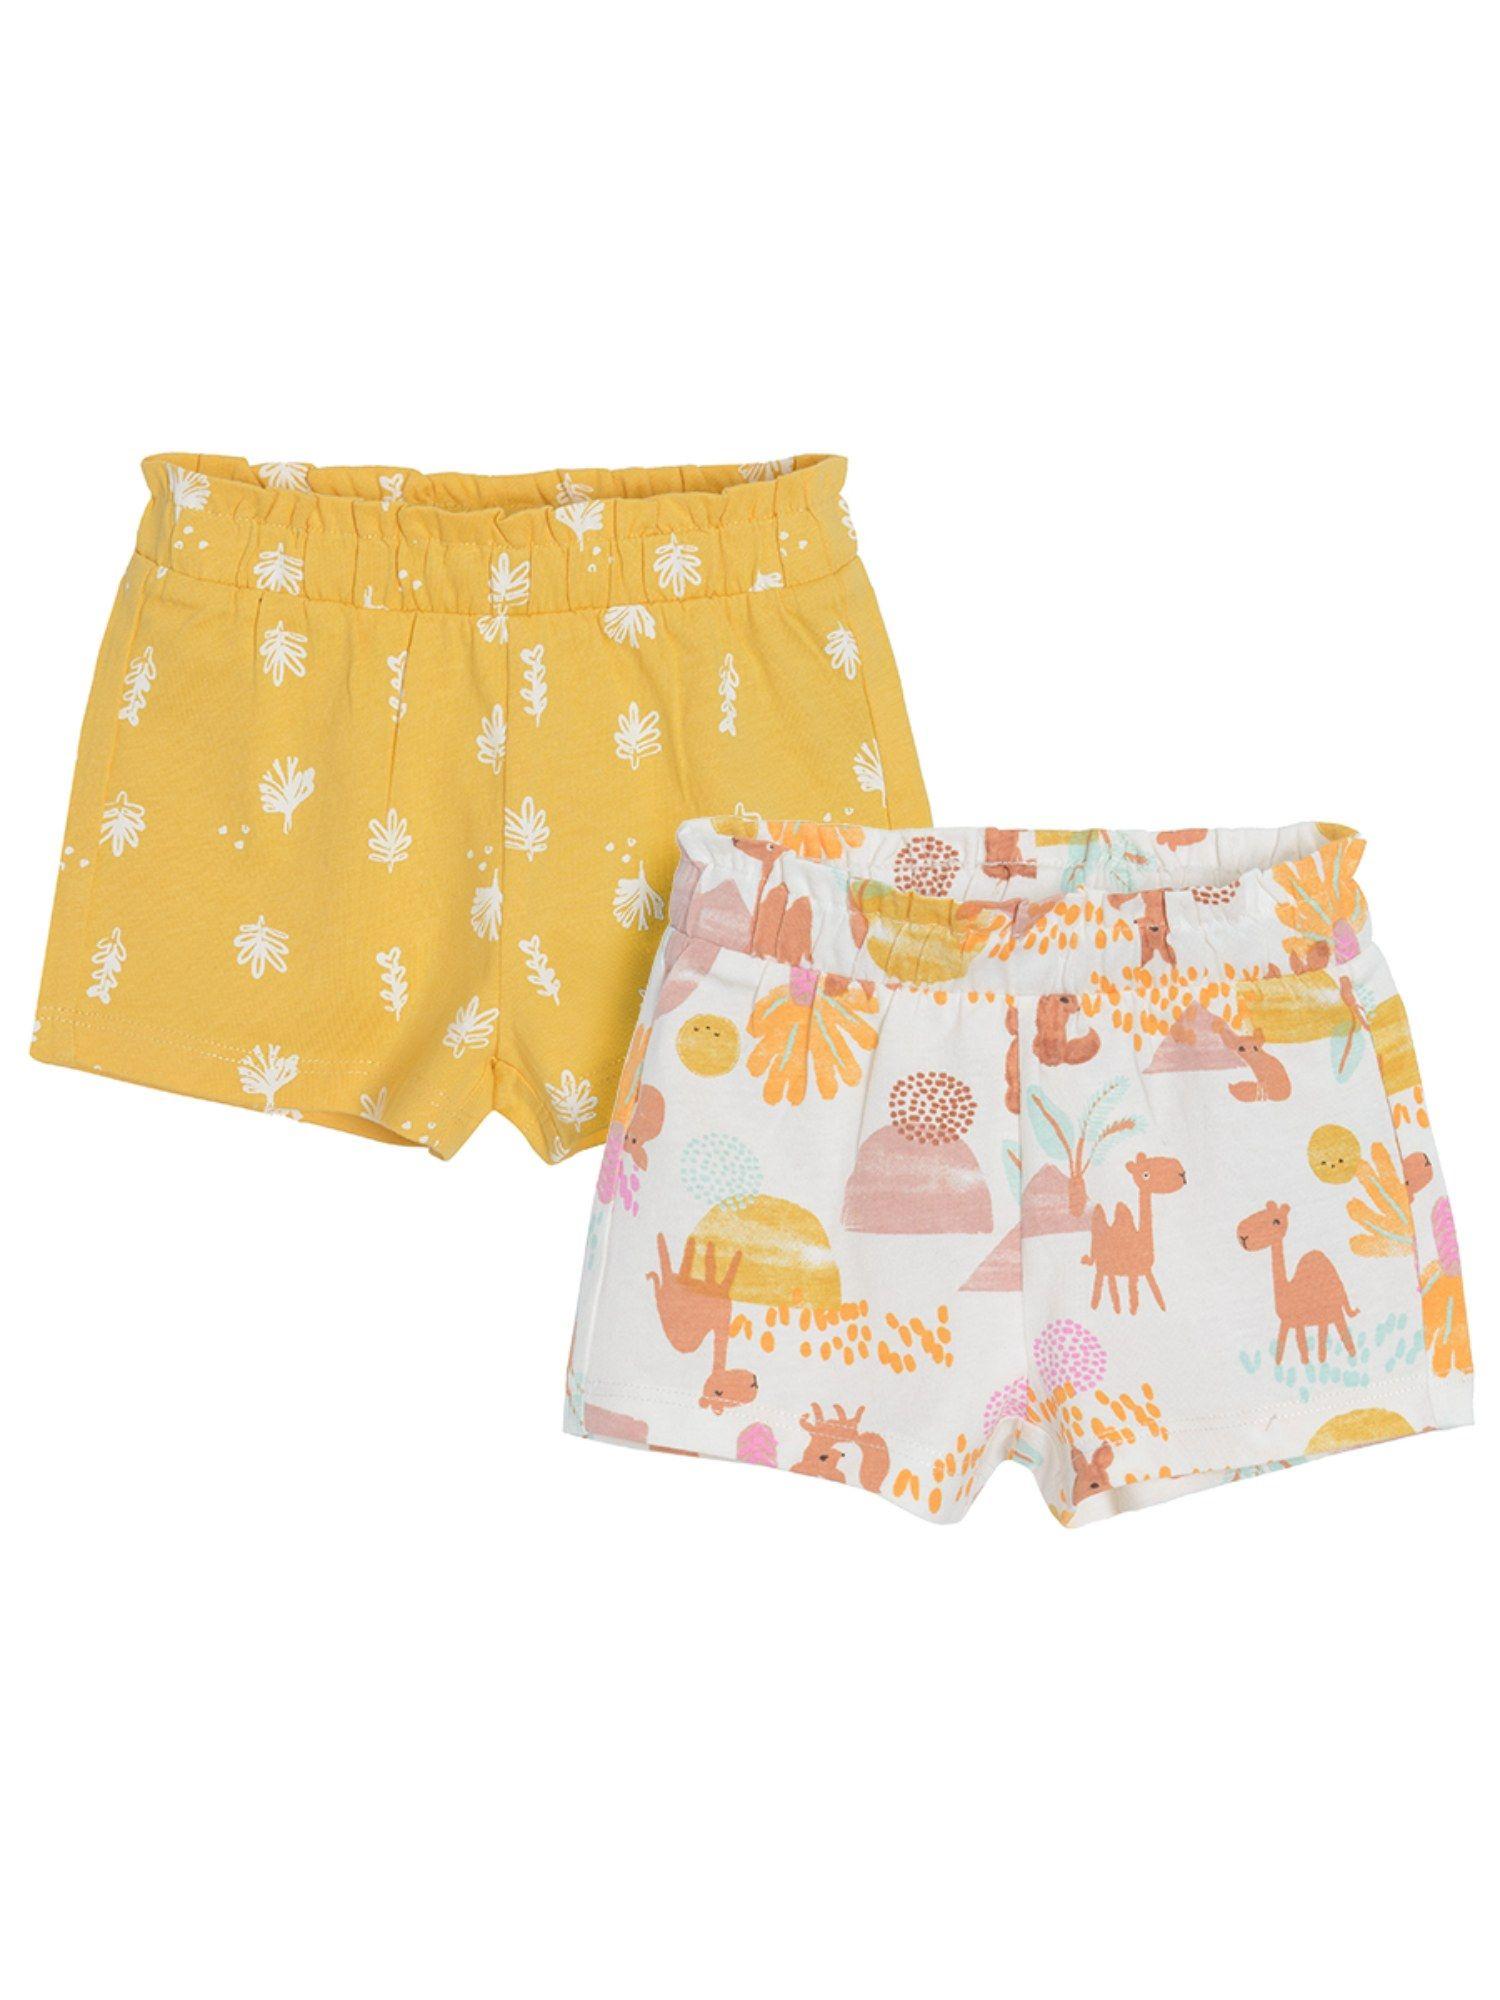 smyk girls multi-color printed shorts (pack of 2)